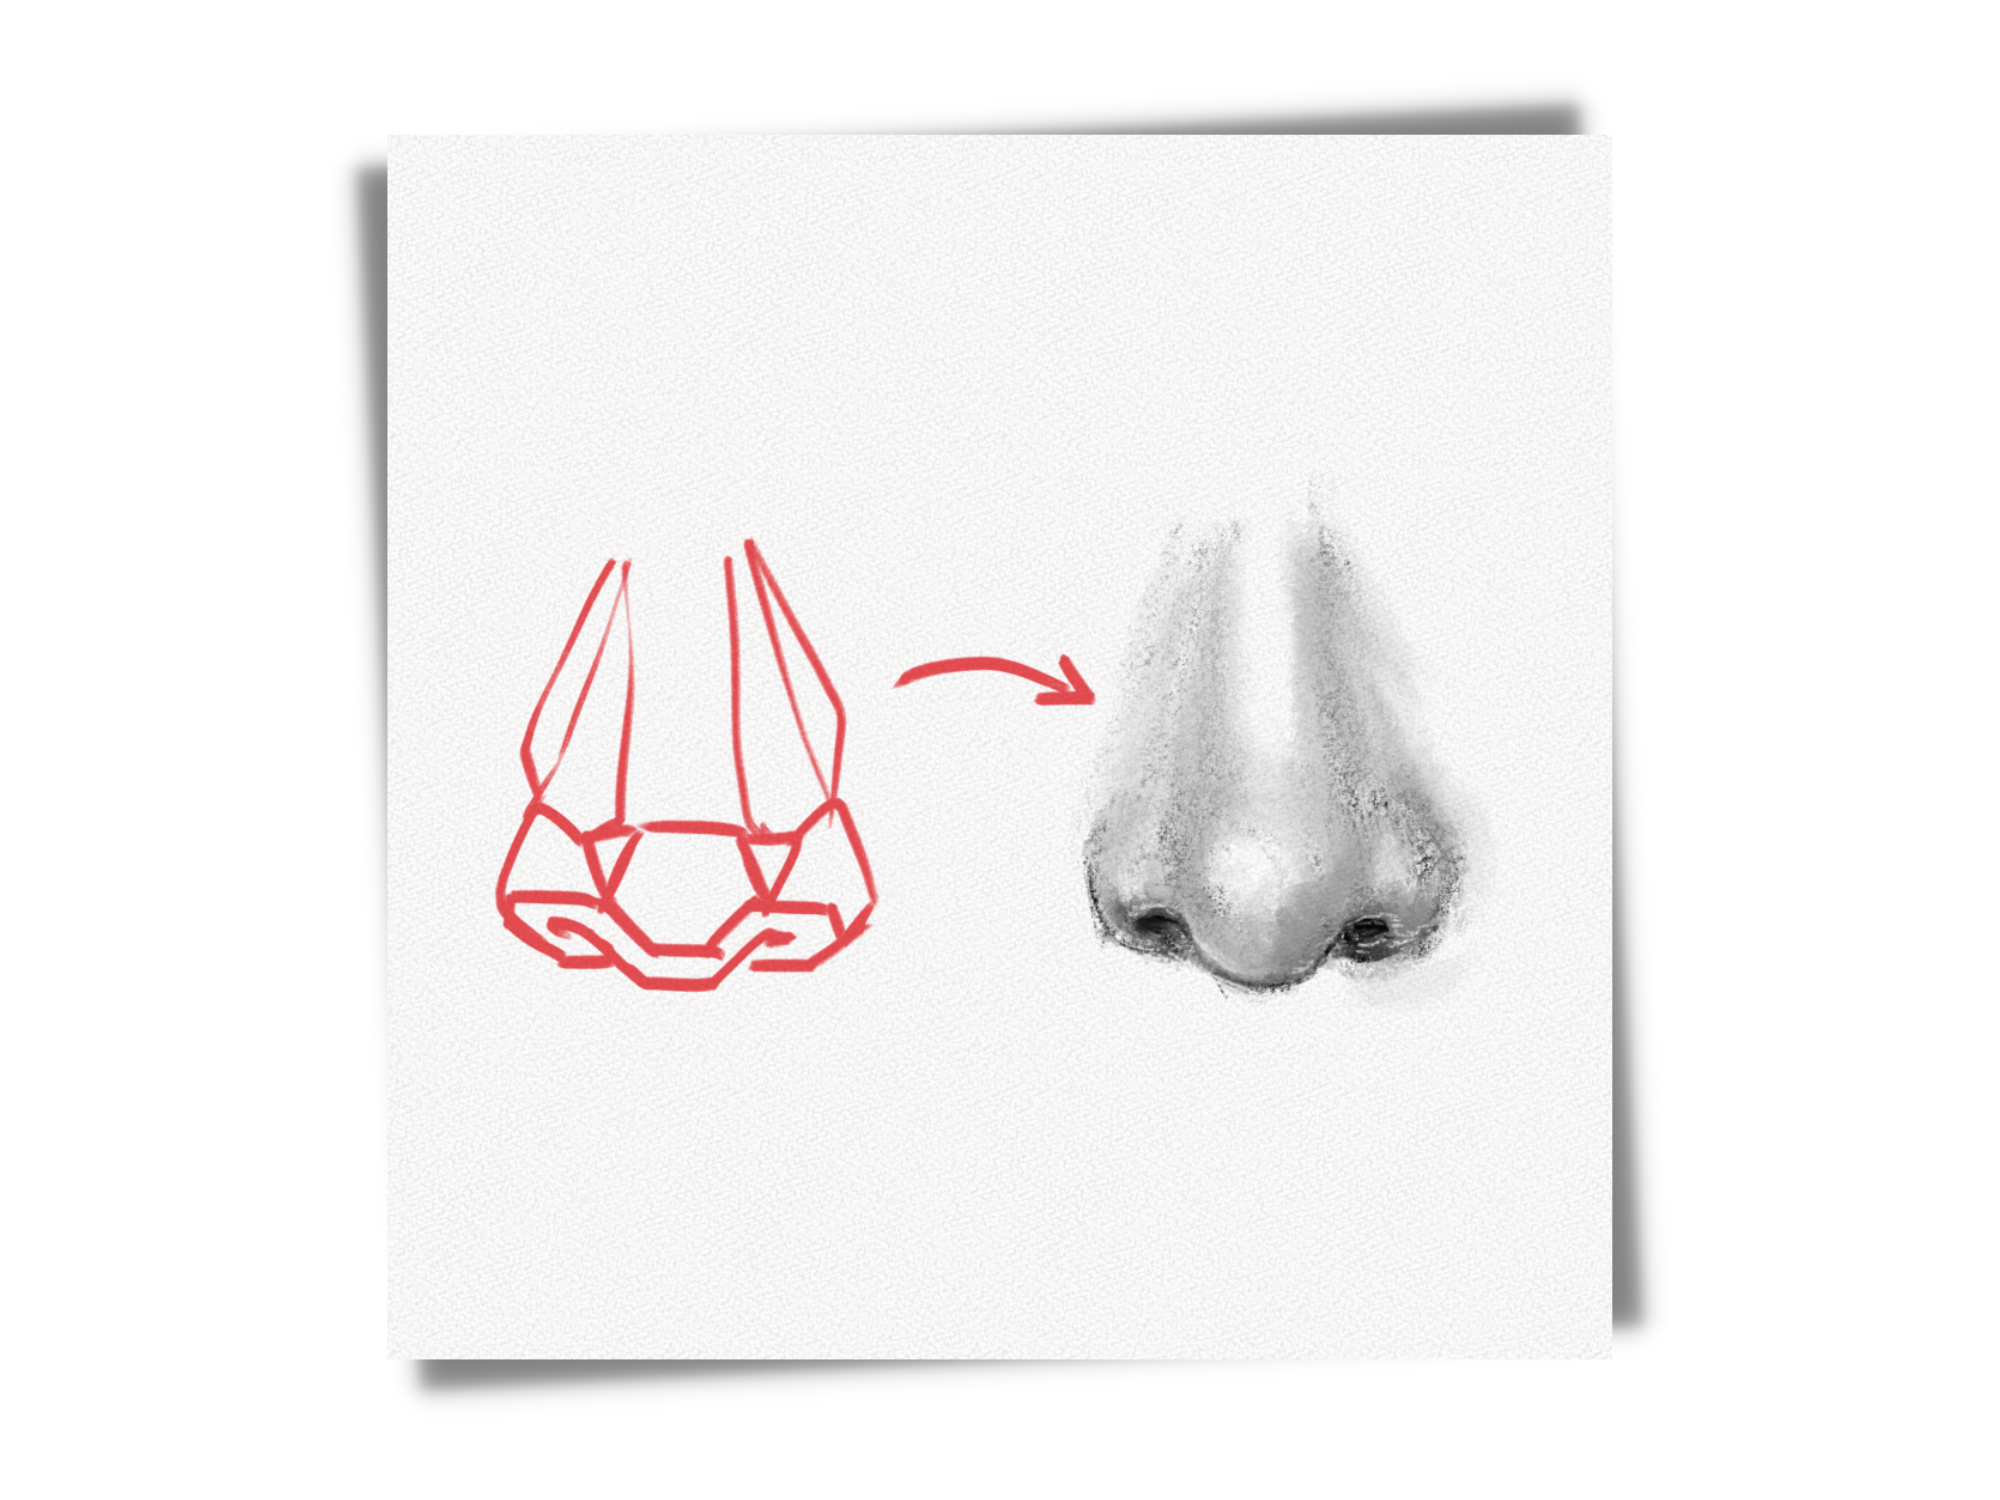 how to draw a nose